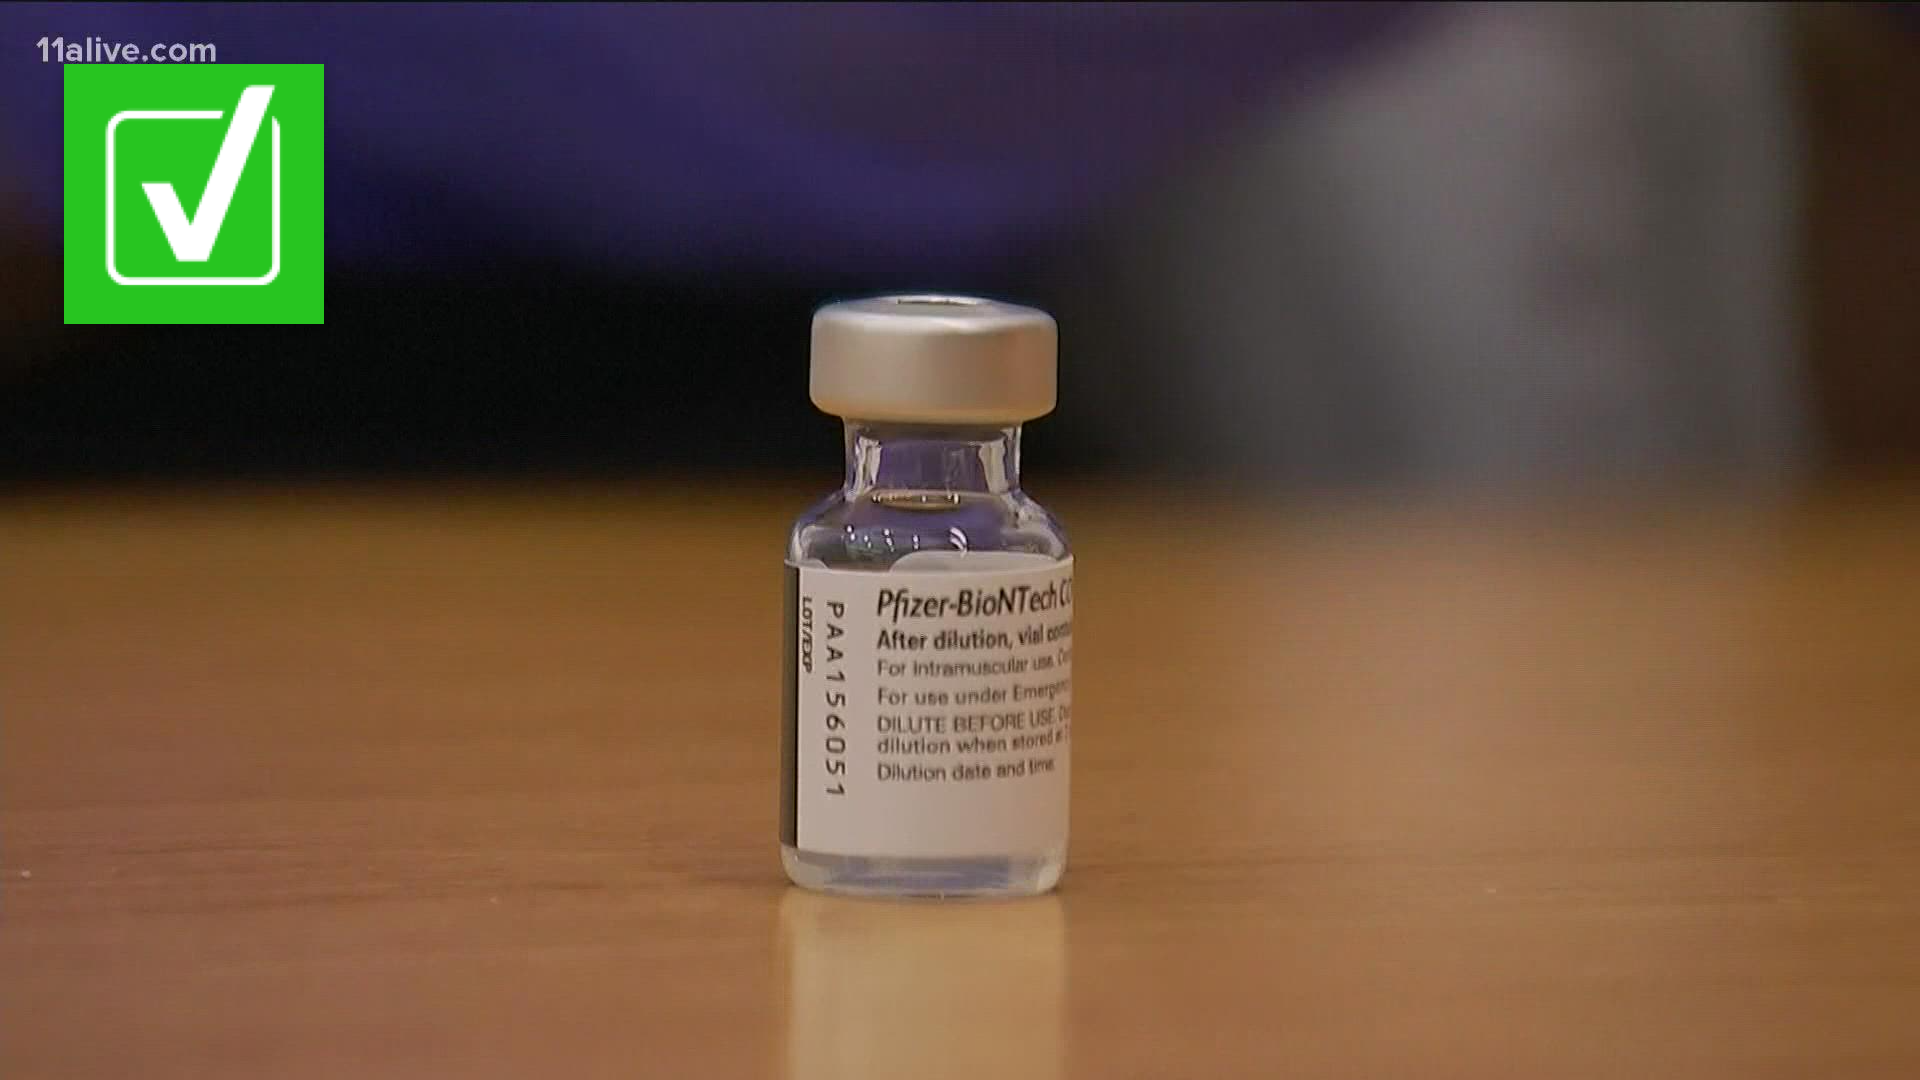 As the world marks one year since the first person received a shot of Pfizer's authorized COVID-19 vaccine, Georgia is struggling to get more people vaccinated.